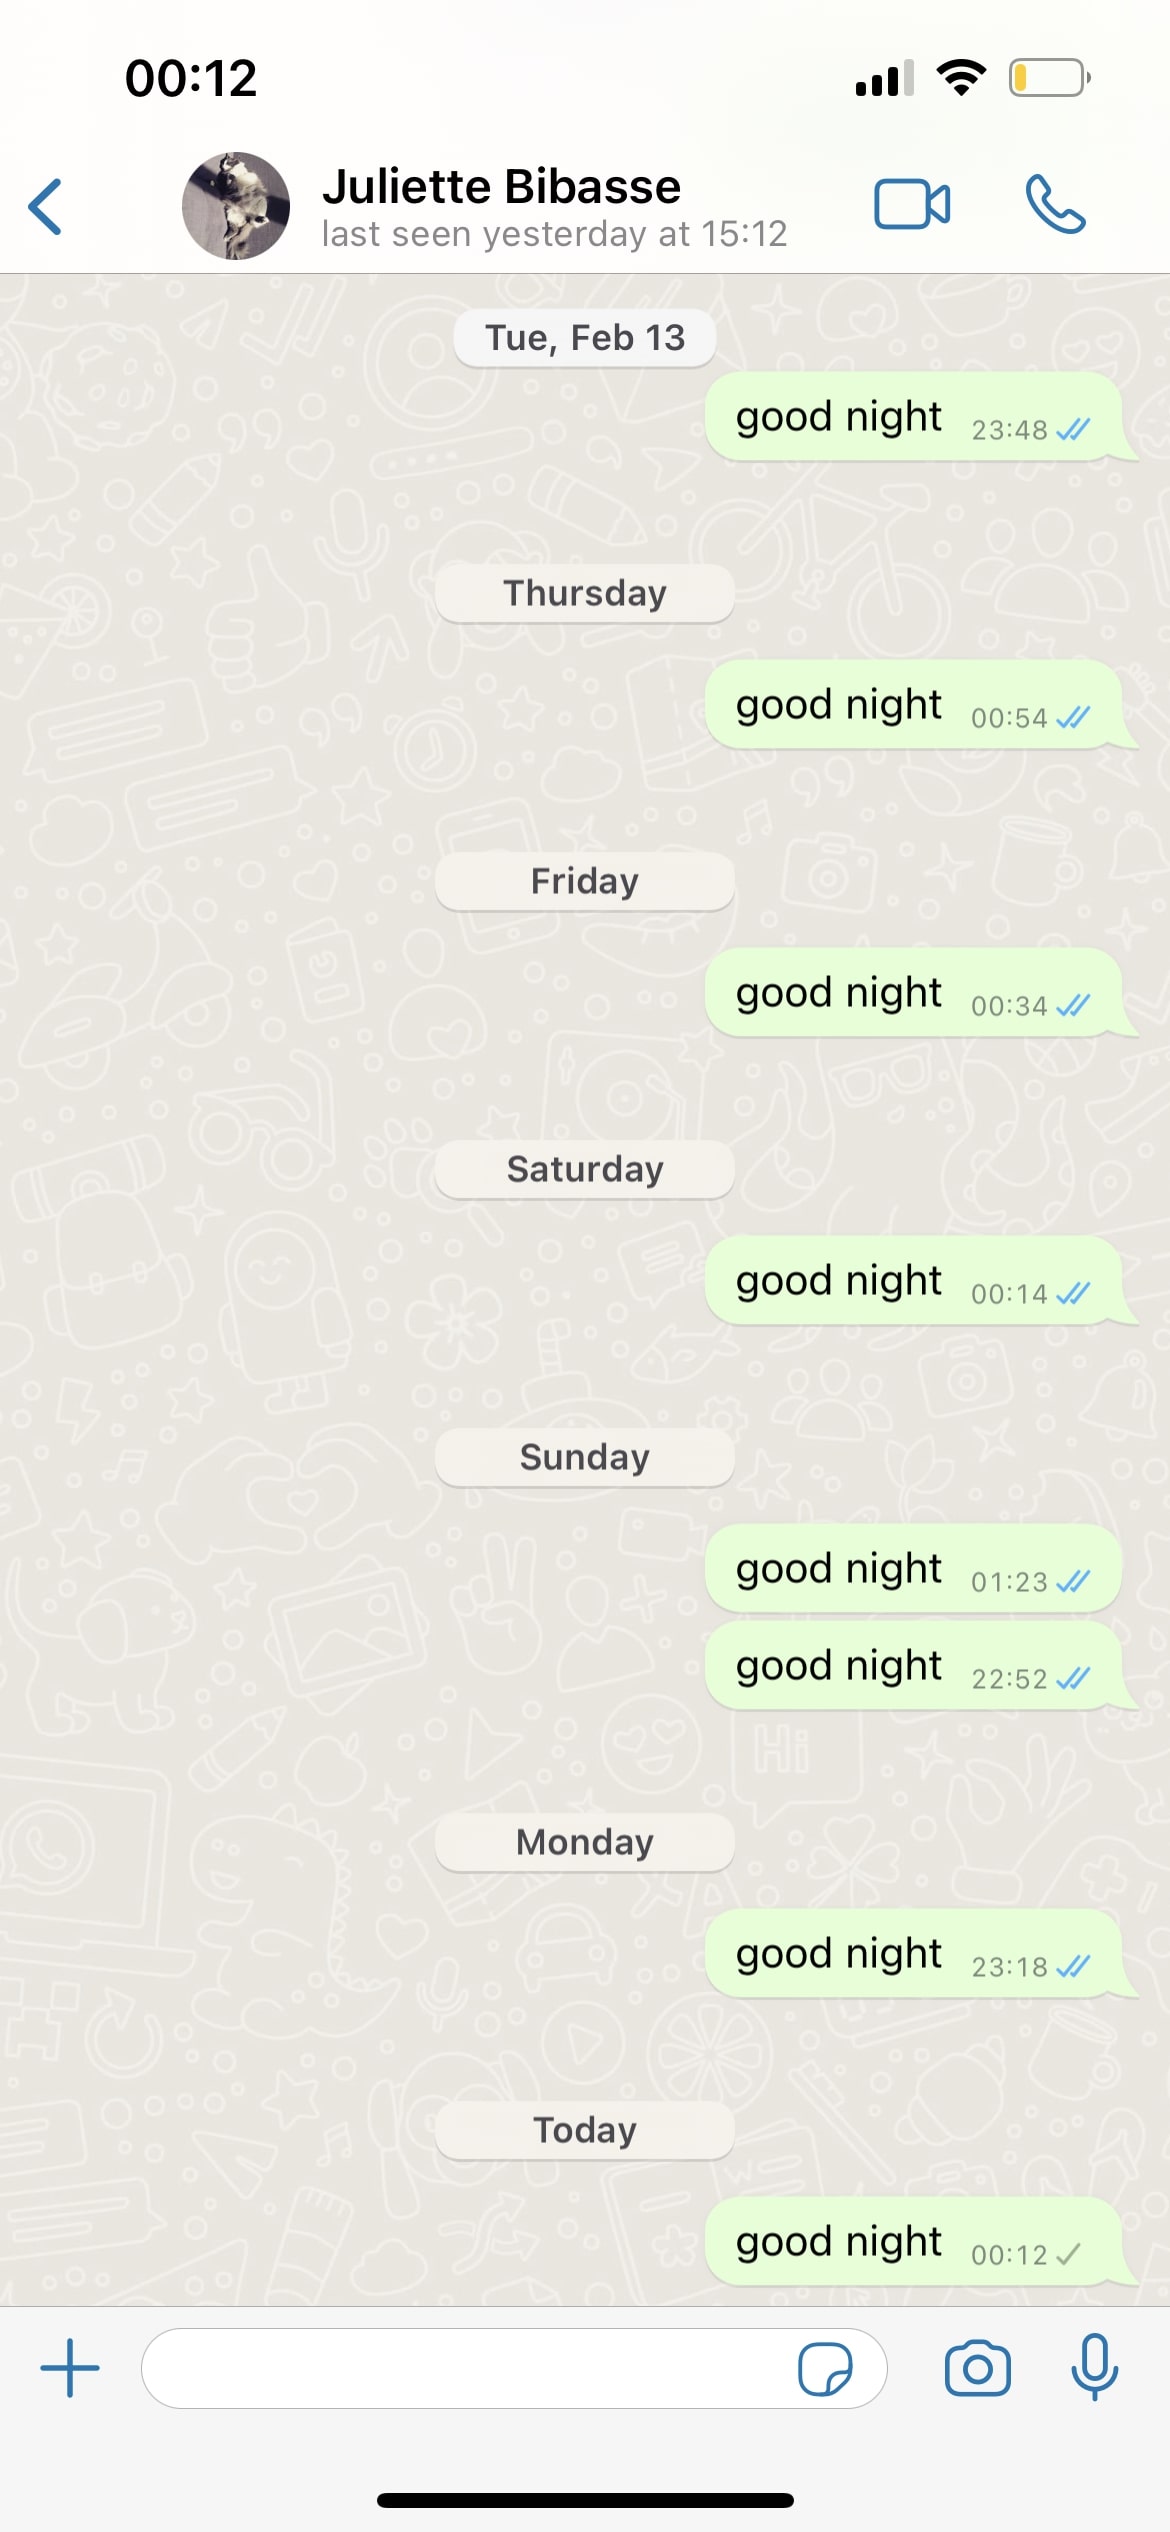 Screenshot of a Whatsapp chat with lots of messages saying "good night"